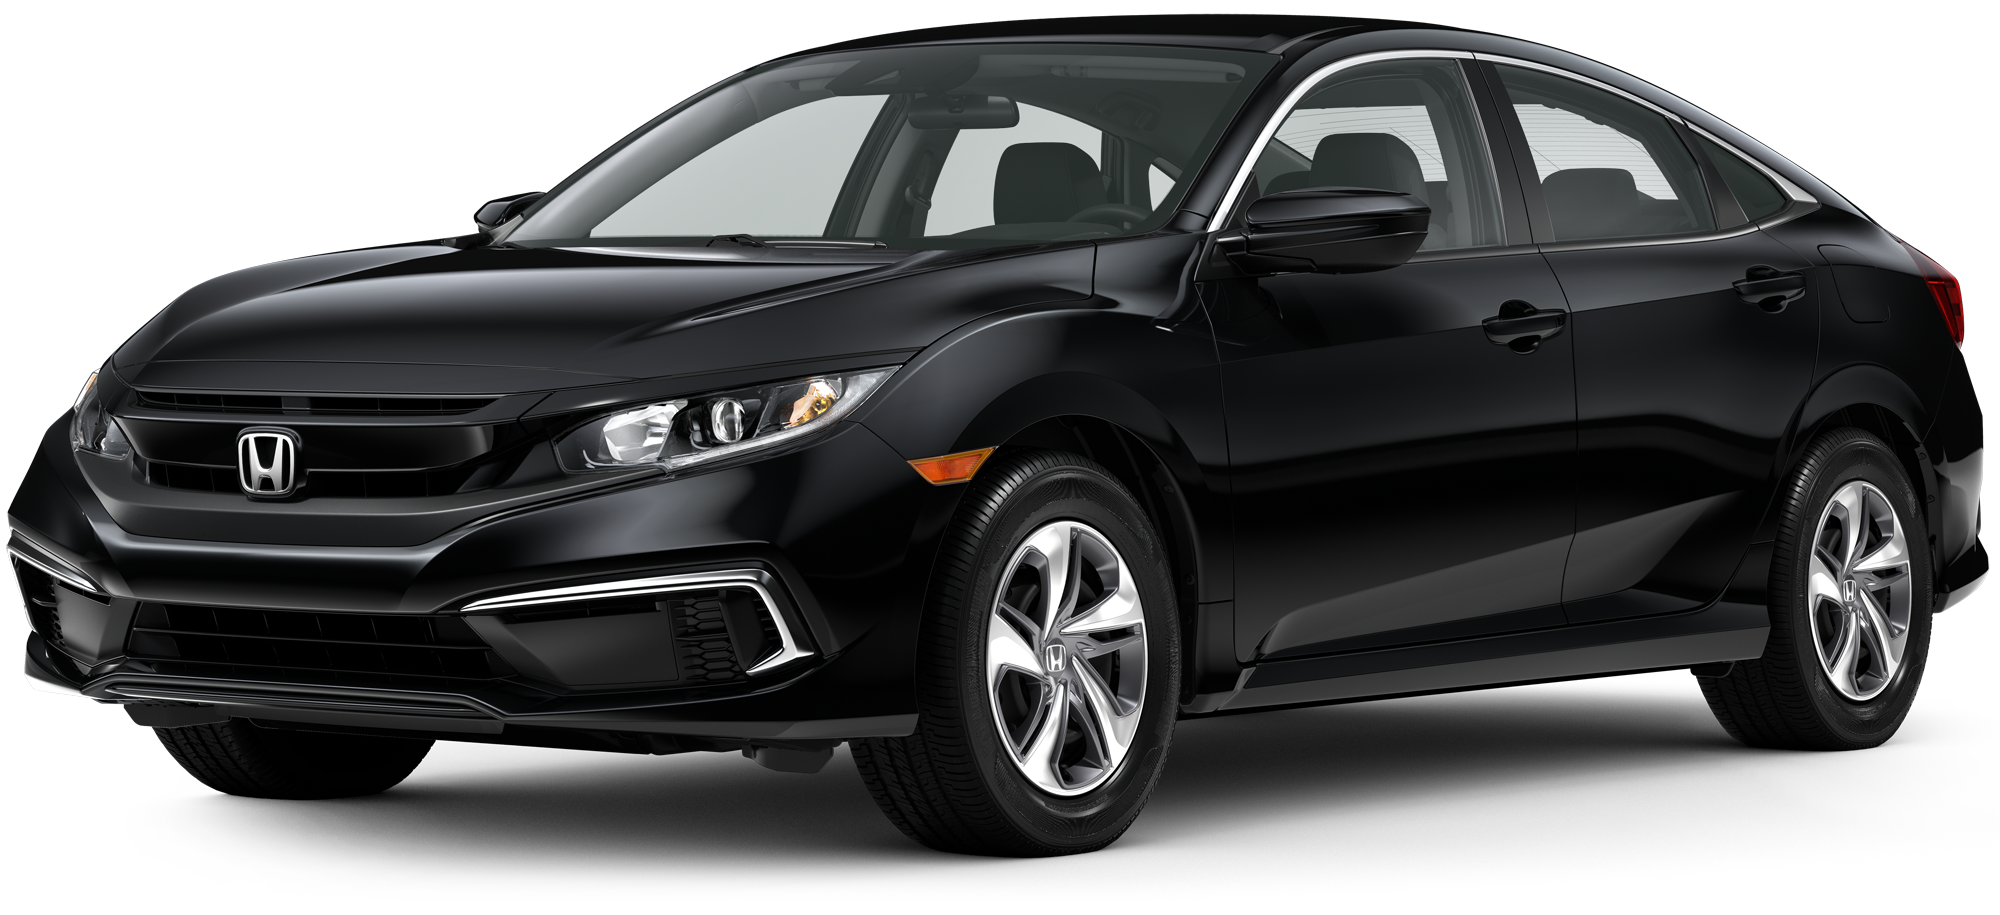 2021 Honda Civic Incentives, Specials & Offers in Seekonk MA